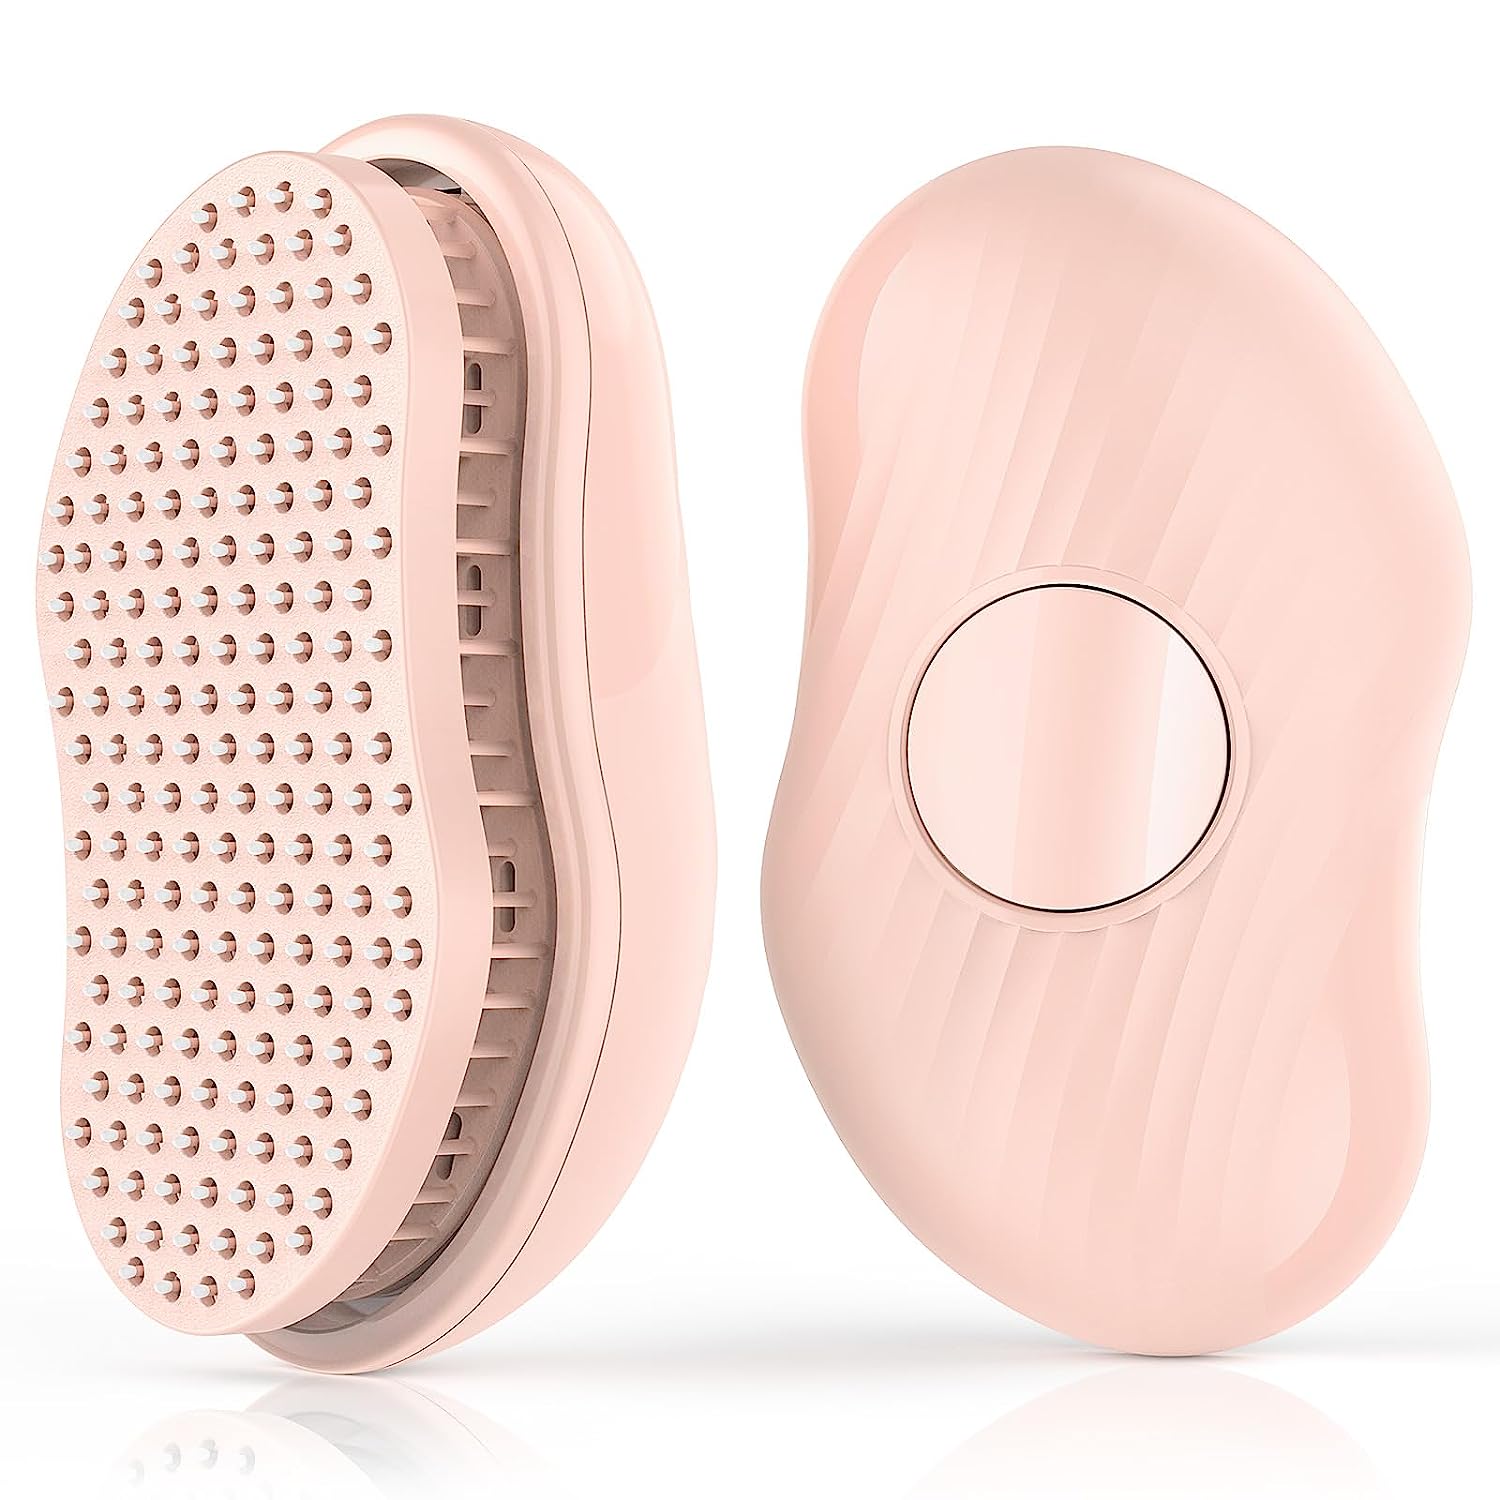 Hair Brushes for Women, One-Key Self-Cleaning Hair [...]